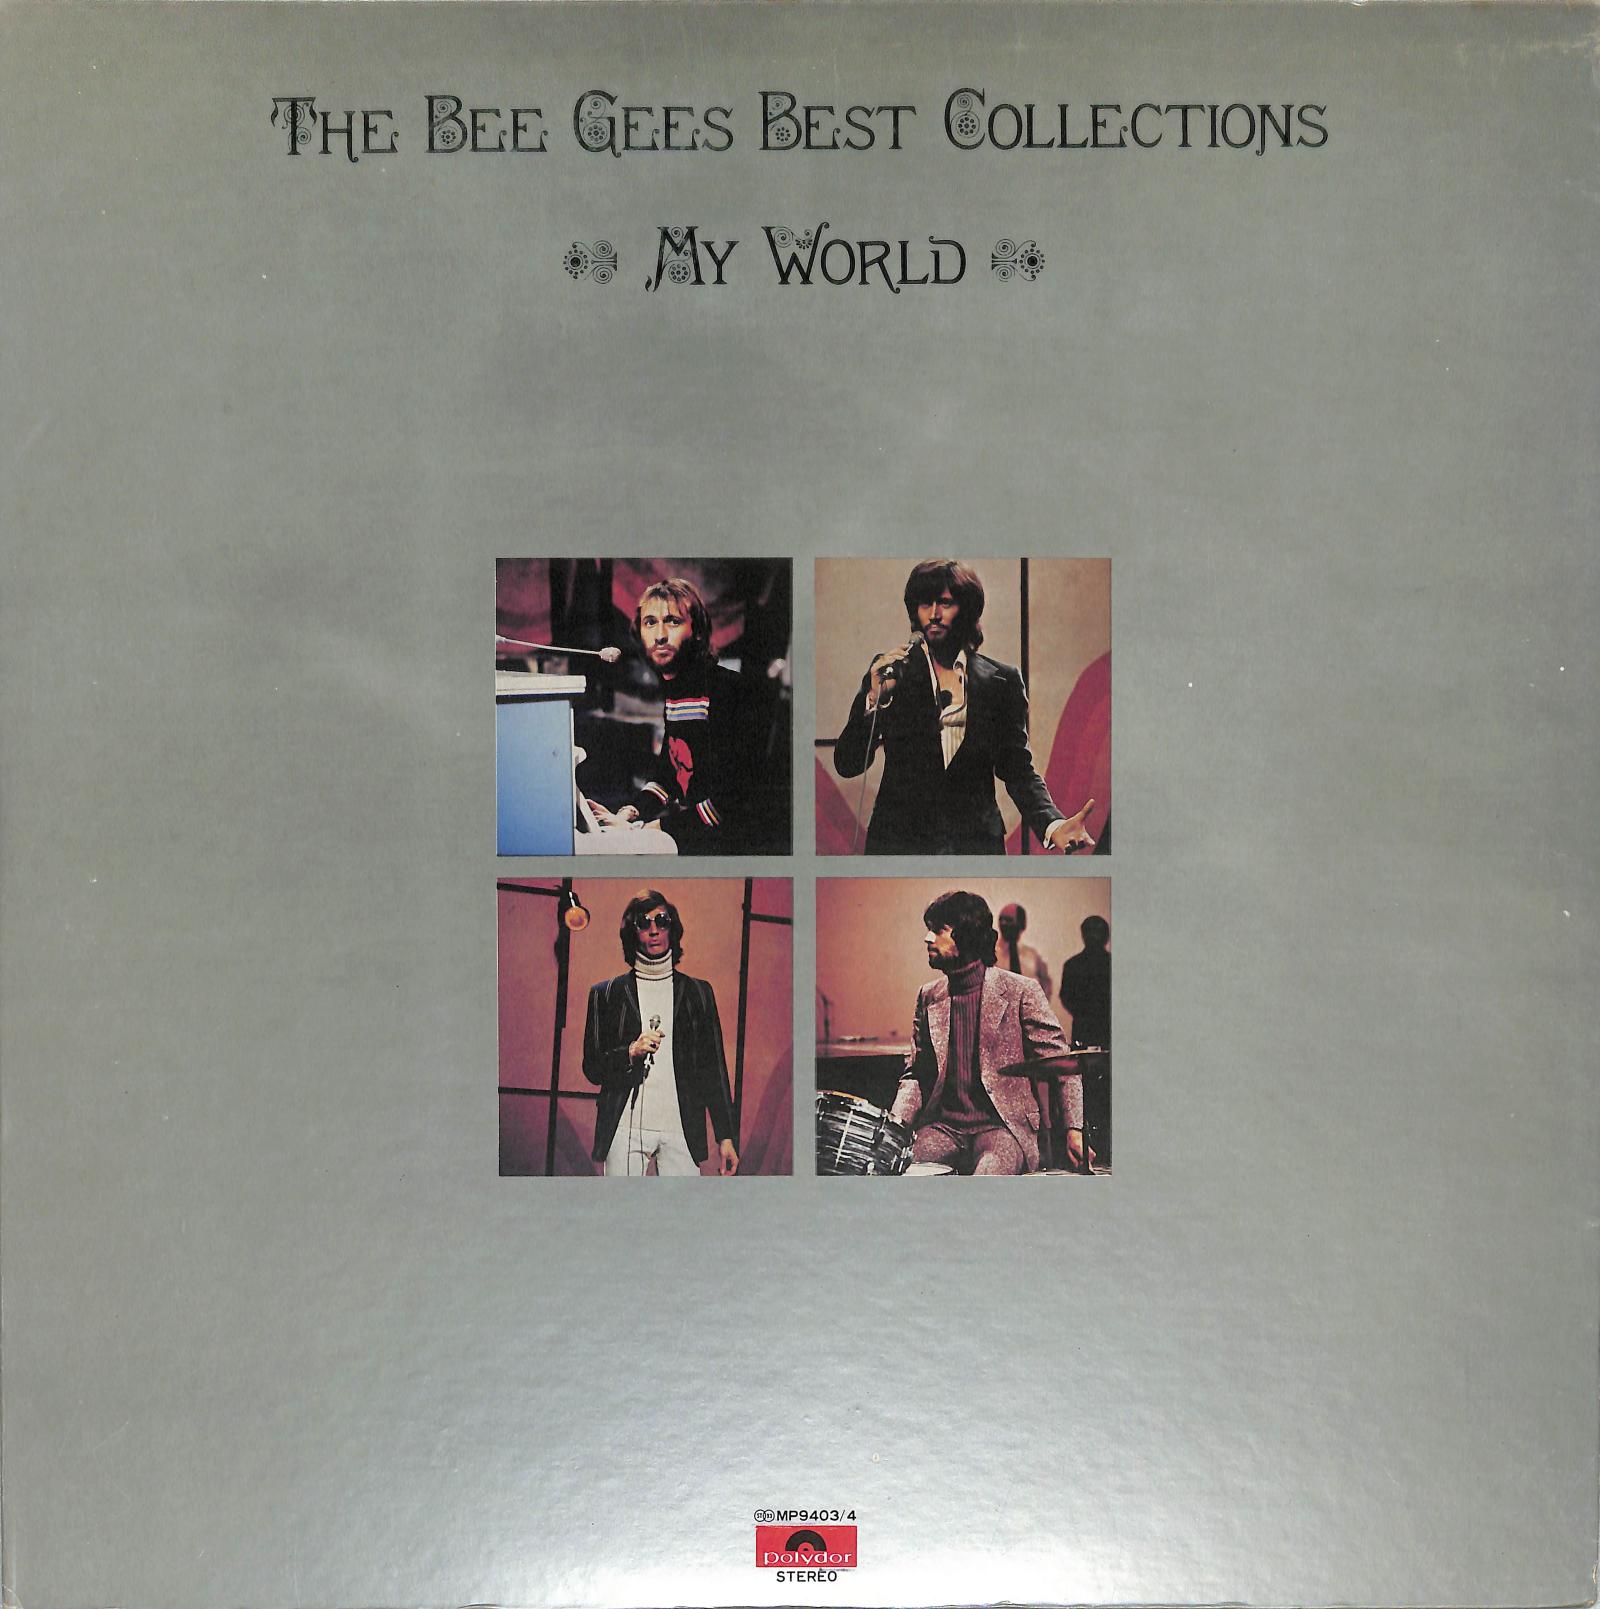 THE BEE GEES - My World / The Bee Gees Best Collections